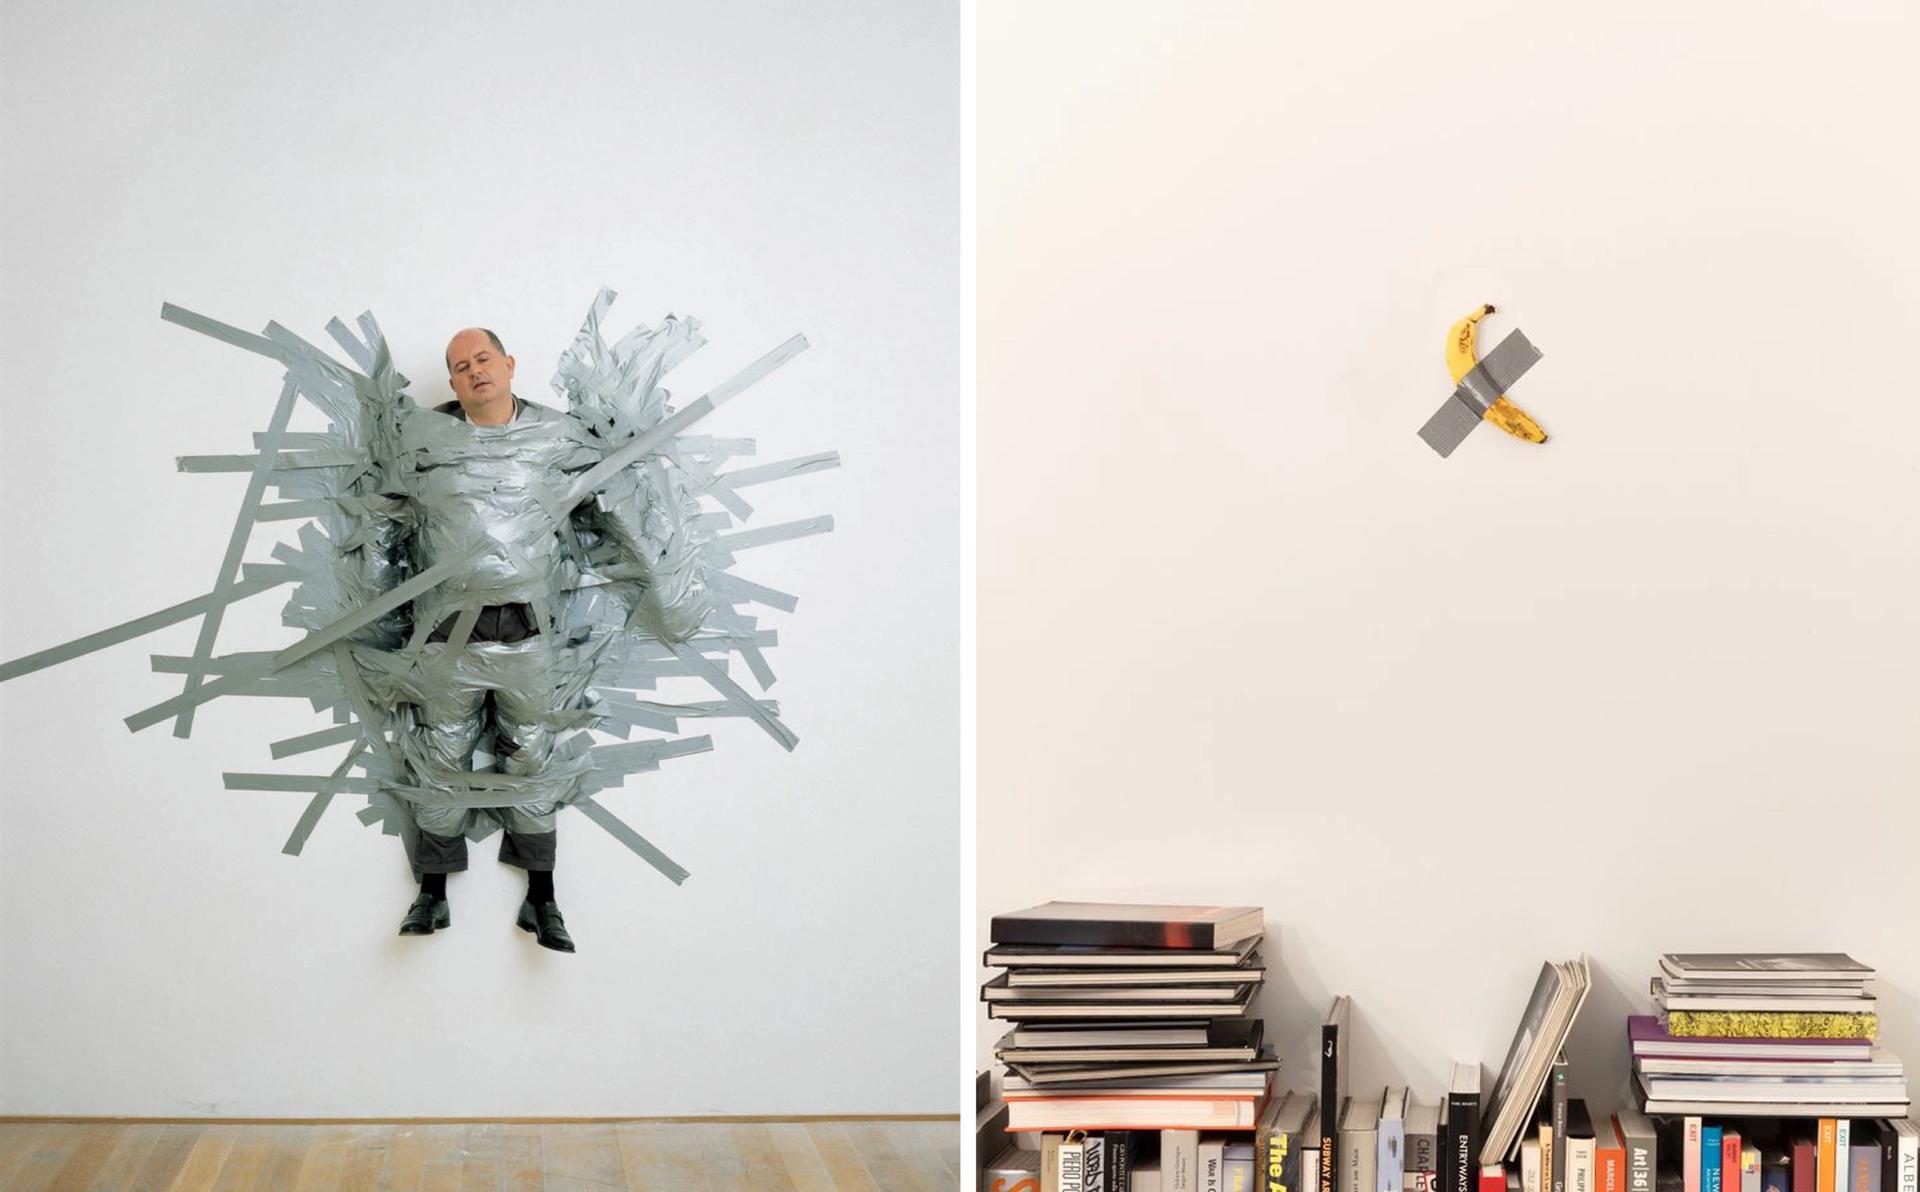 Left: Maurizio Cattelan's A Perfect Day (1999), where he taped  his gallerist Massimo De Carlo to the wall of the gallery. Right: Cattelan's Comedian (2019) on show at Galerie Perrotin's booth at Art Basel in Miami Beach this month A Perfect Day photo: Armin Linke. Comedian photo: ©  Zeno Zotti. Both courtesy of the artists and Galerie Perrotin